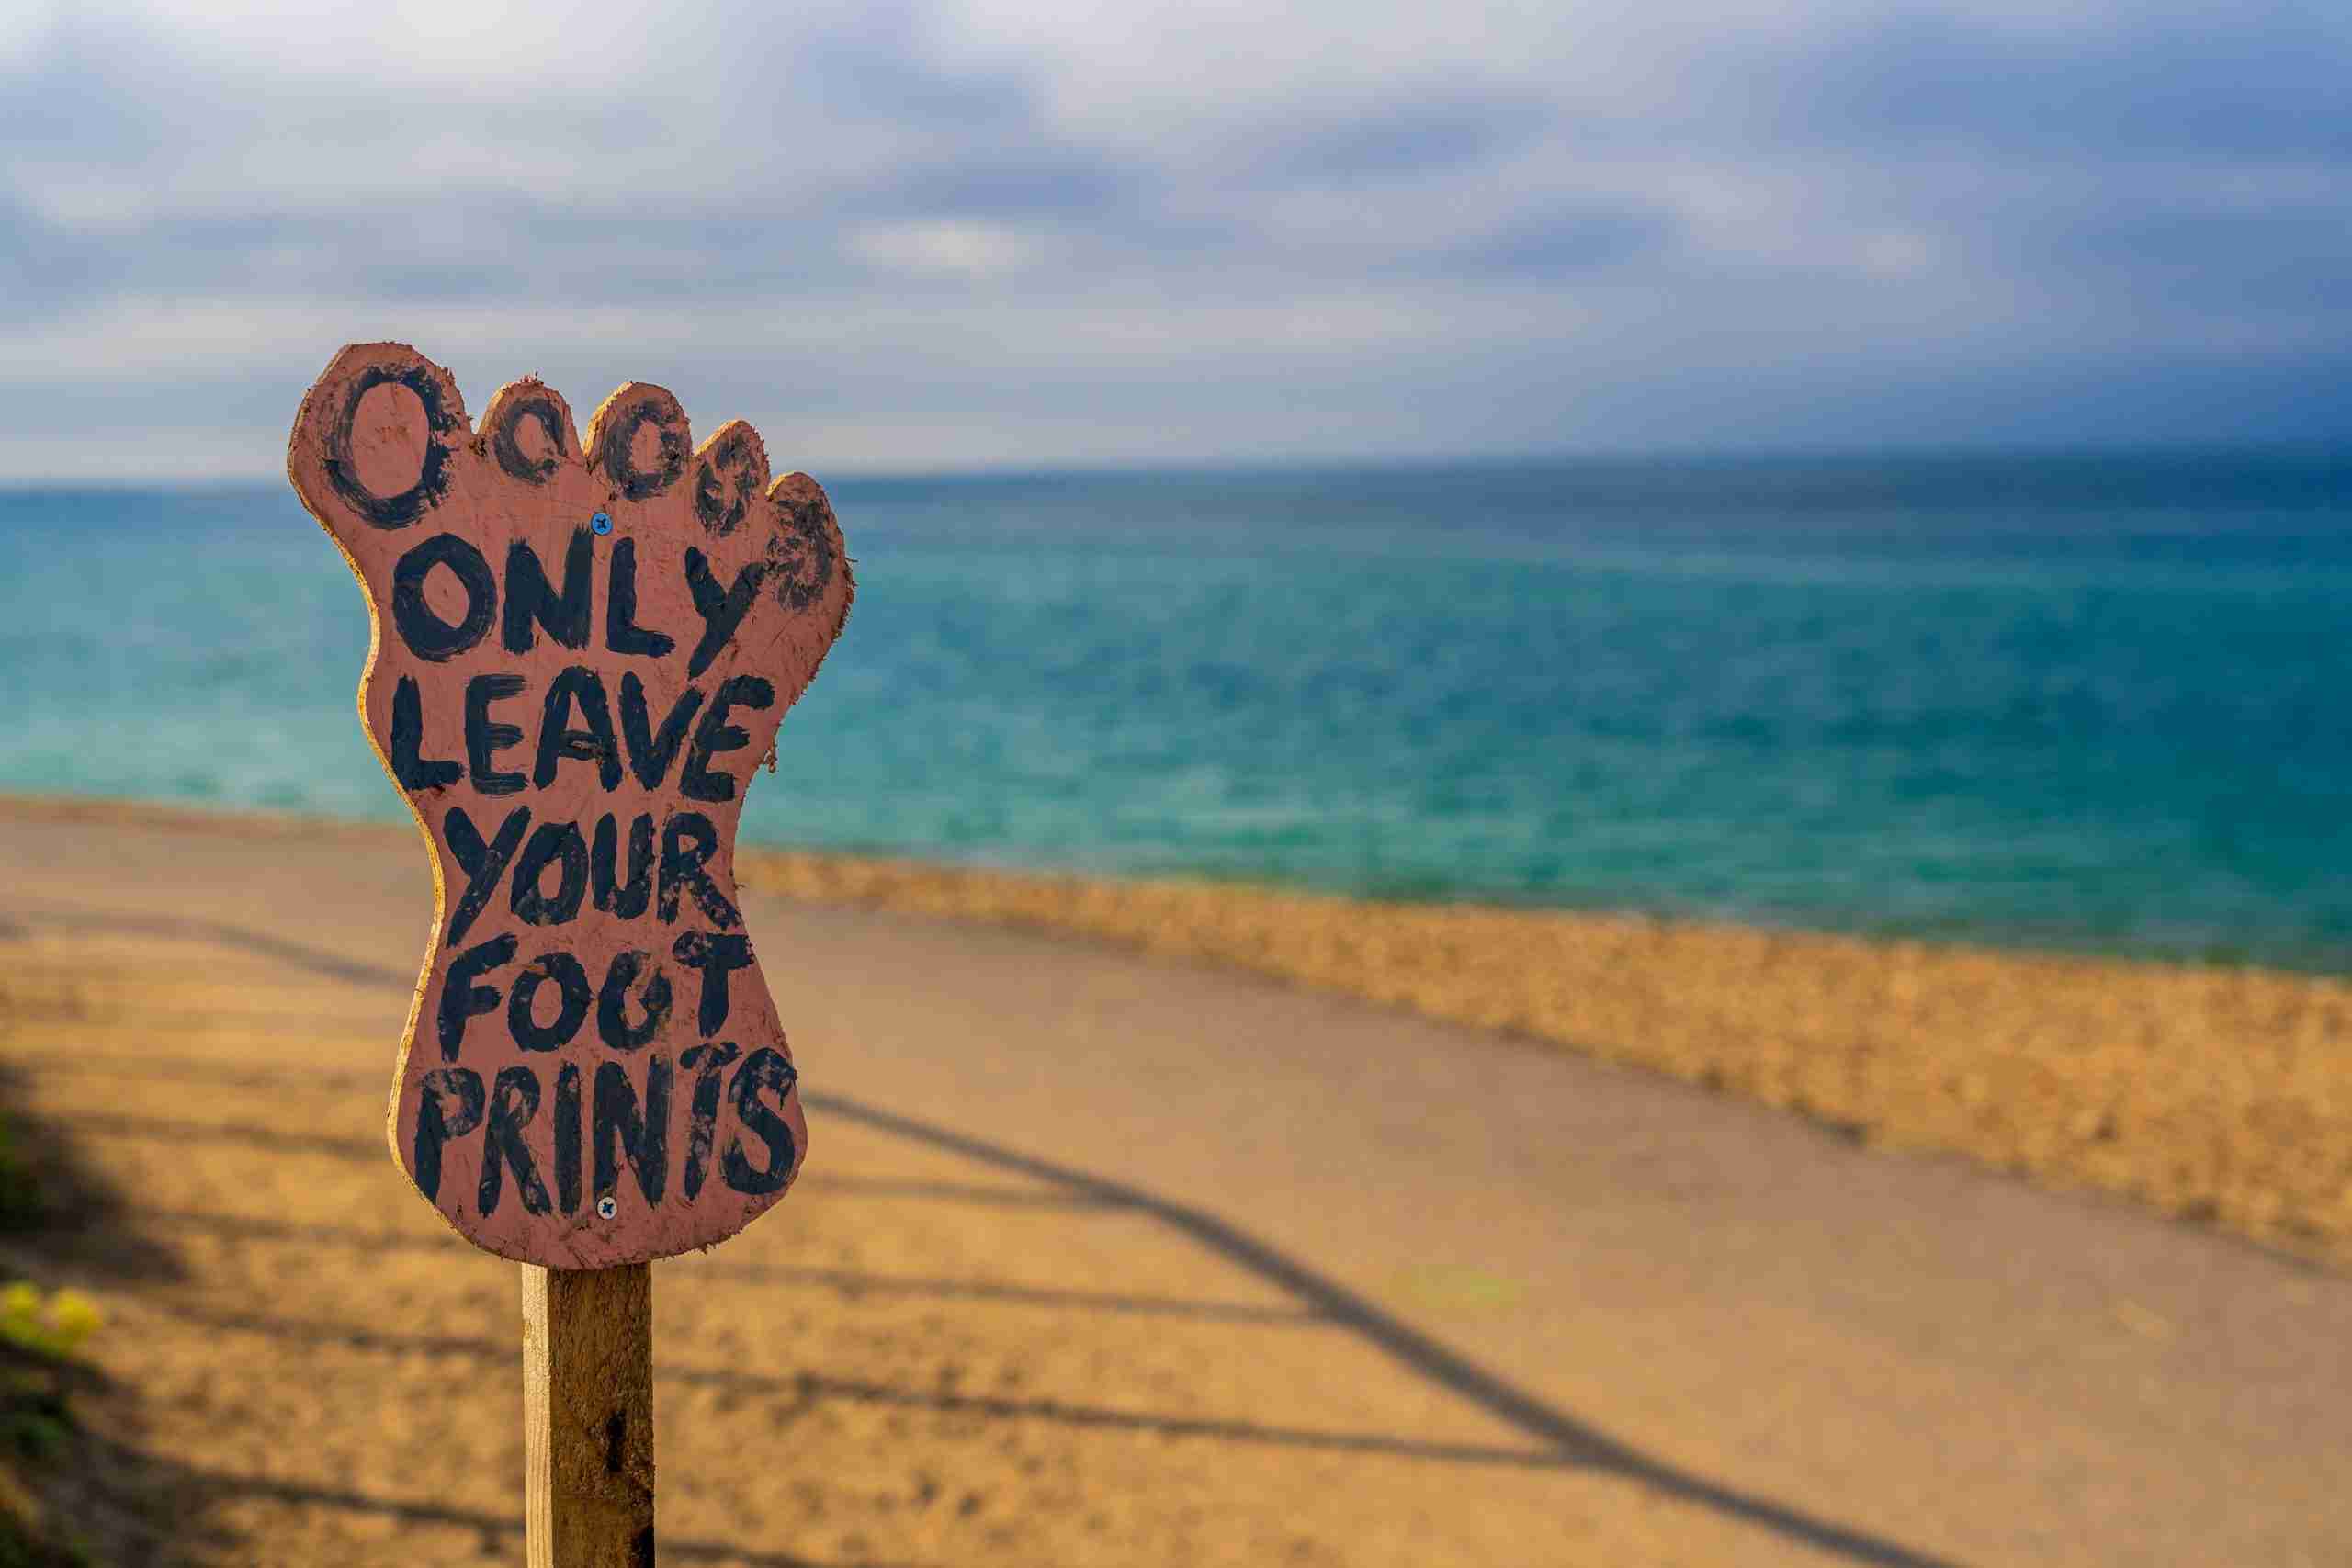 A sigh that says only leave your footprint